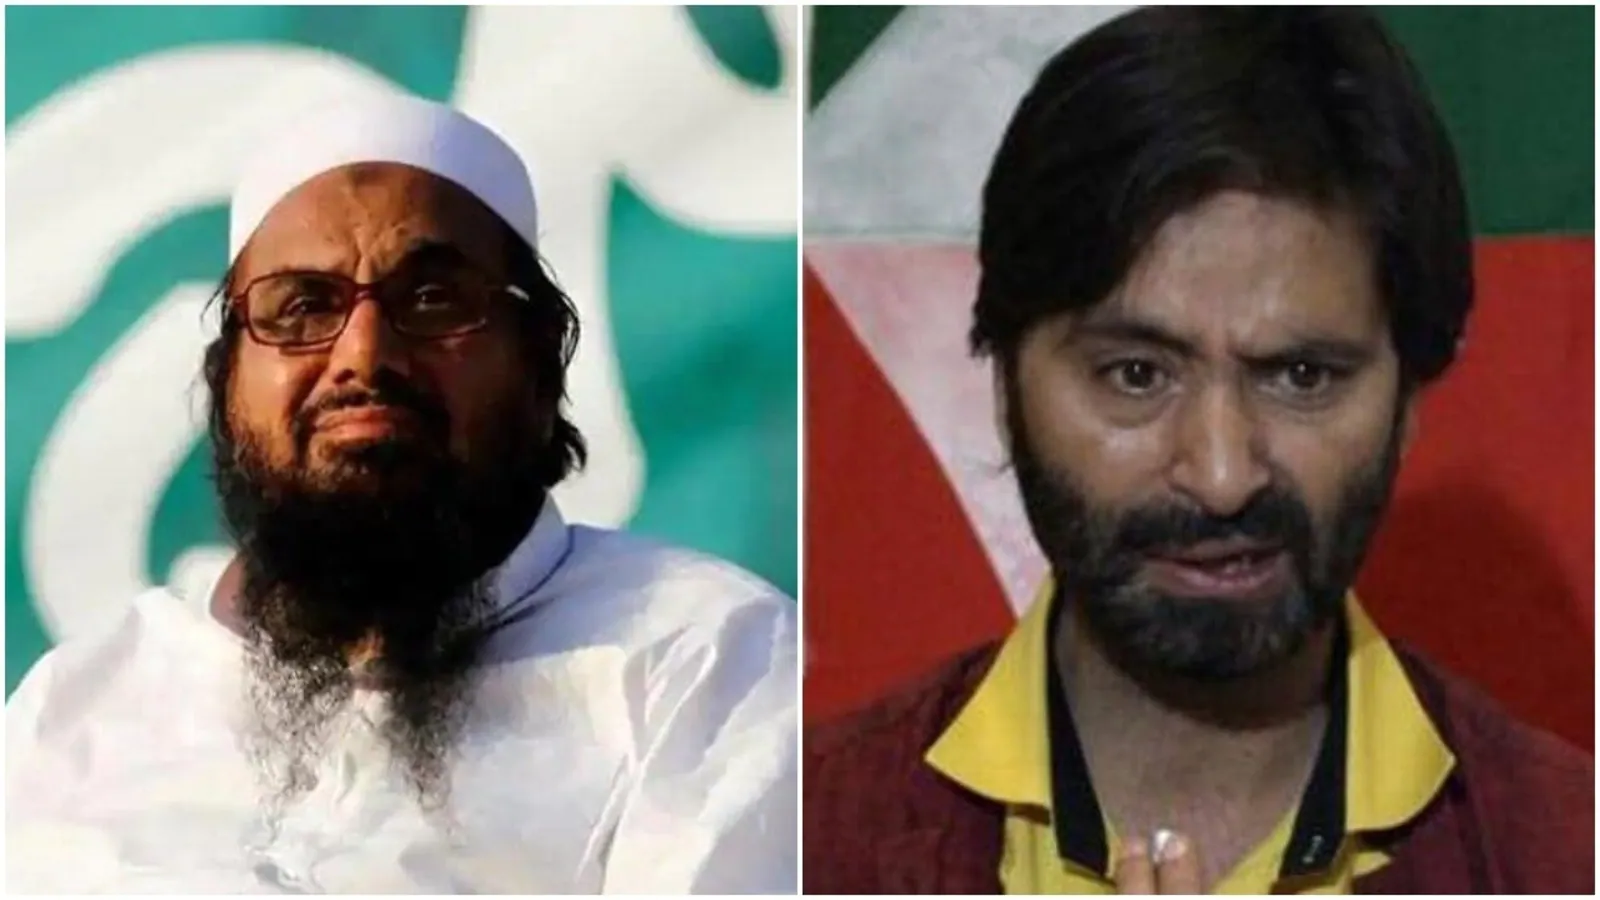 J&K terror fund case: Delhi court orders framing charges against Hafiz Saeed & others